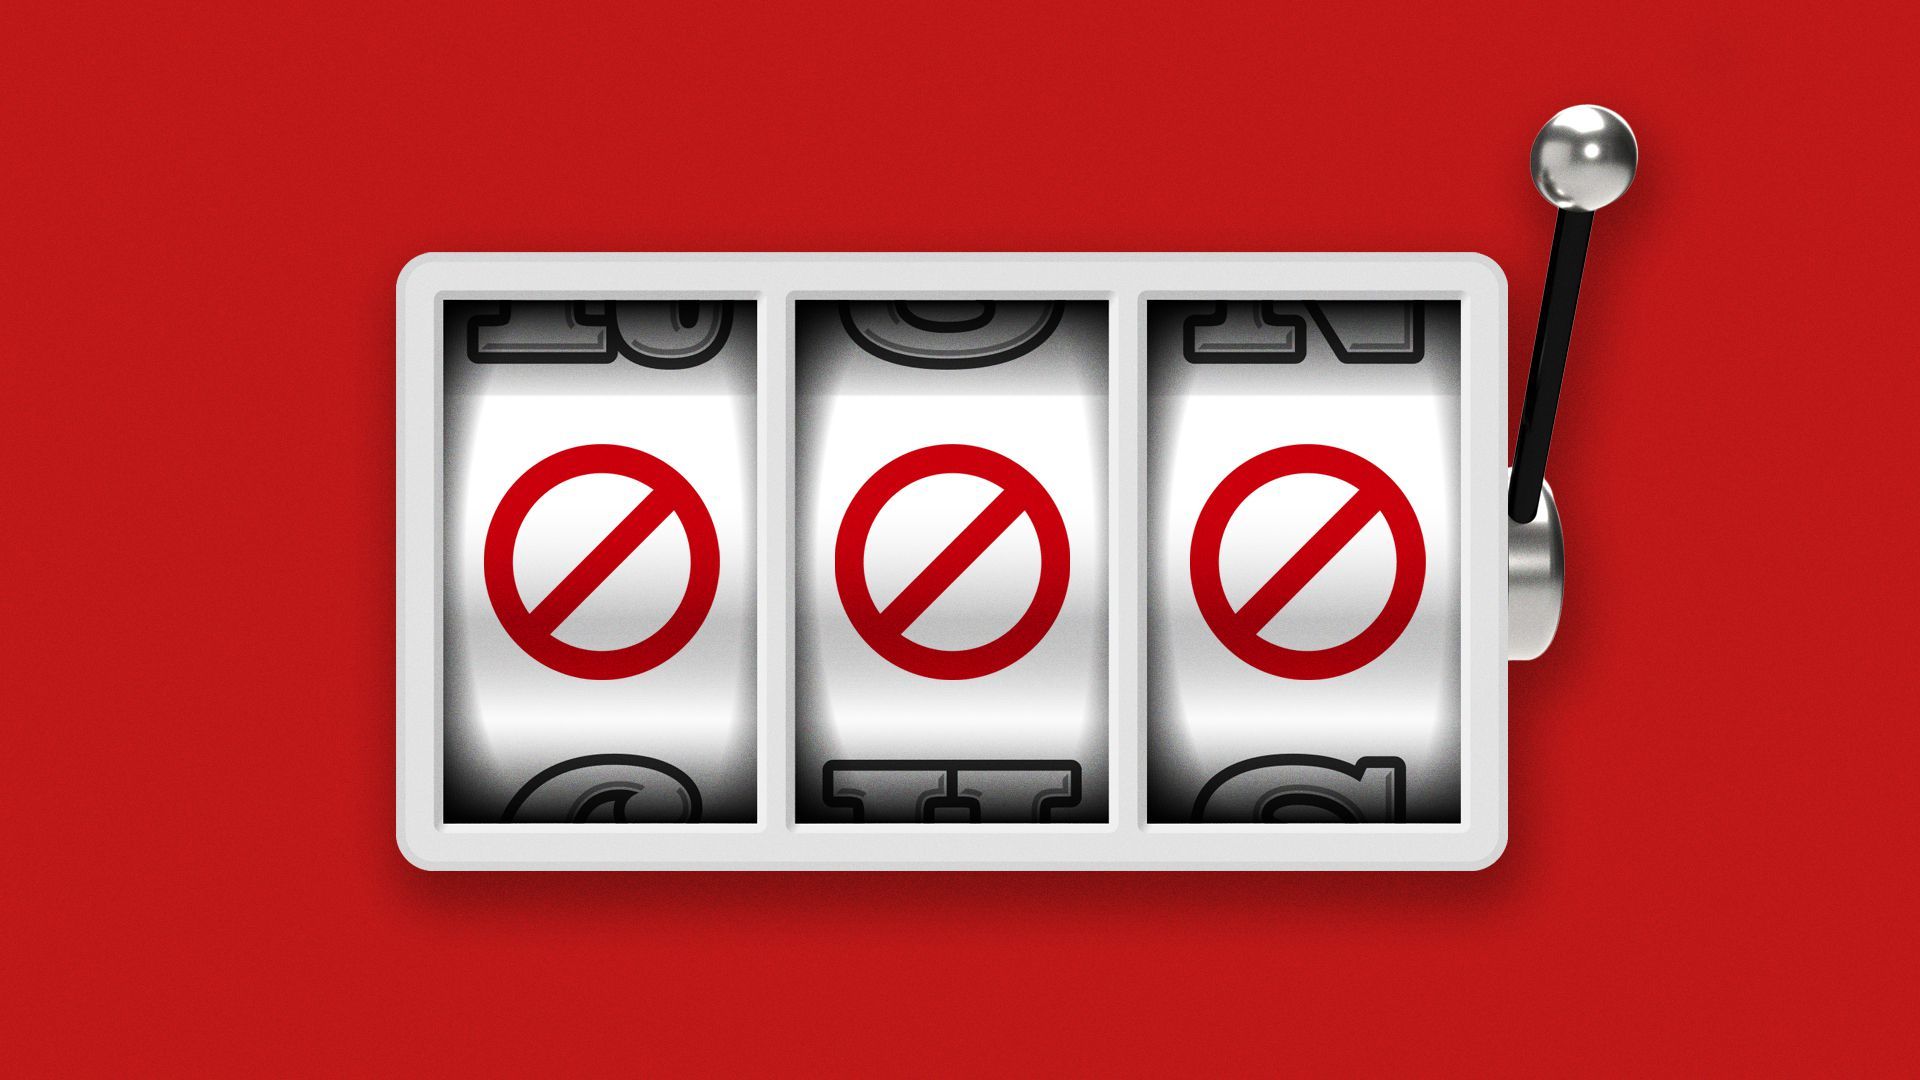 Illustration of a jackpot slot machine with the "no" symbol instead of 7's.